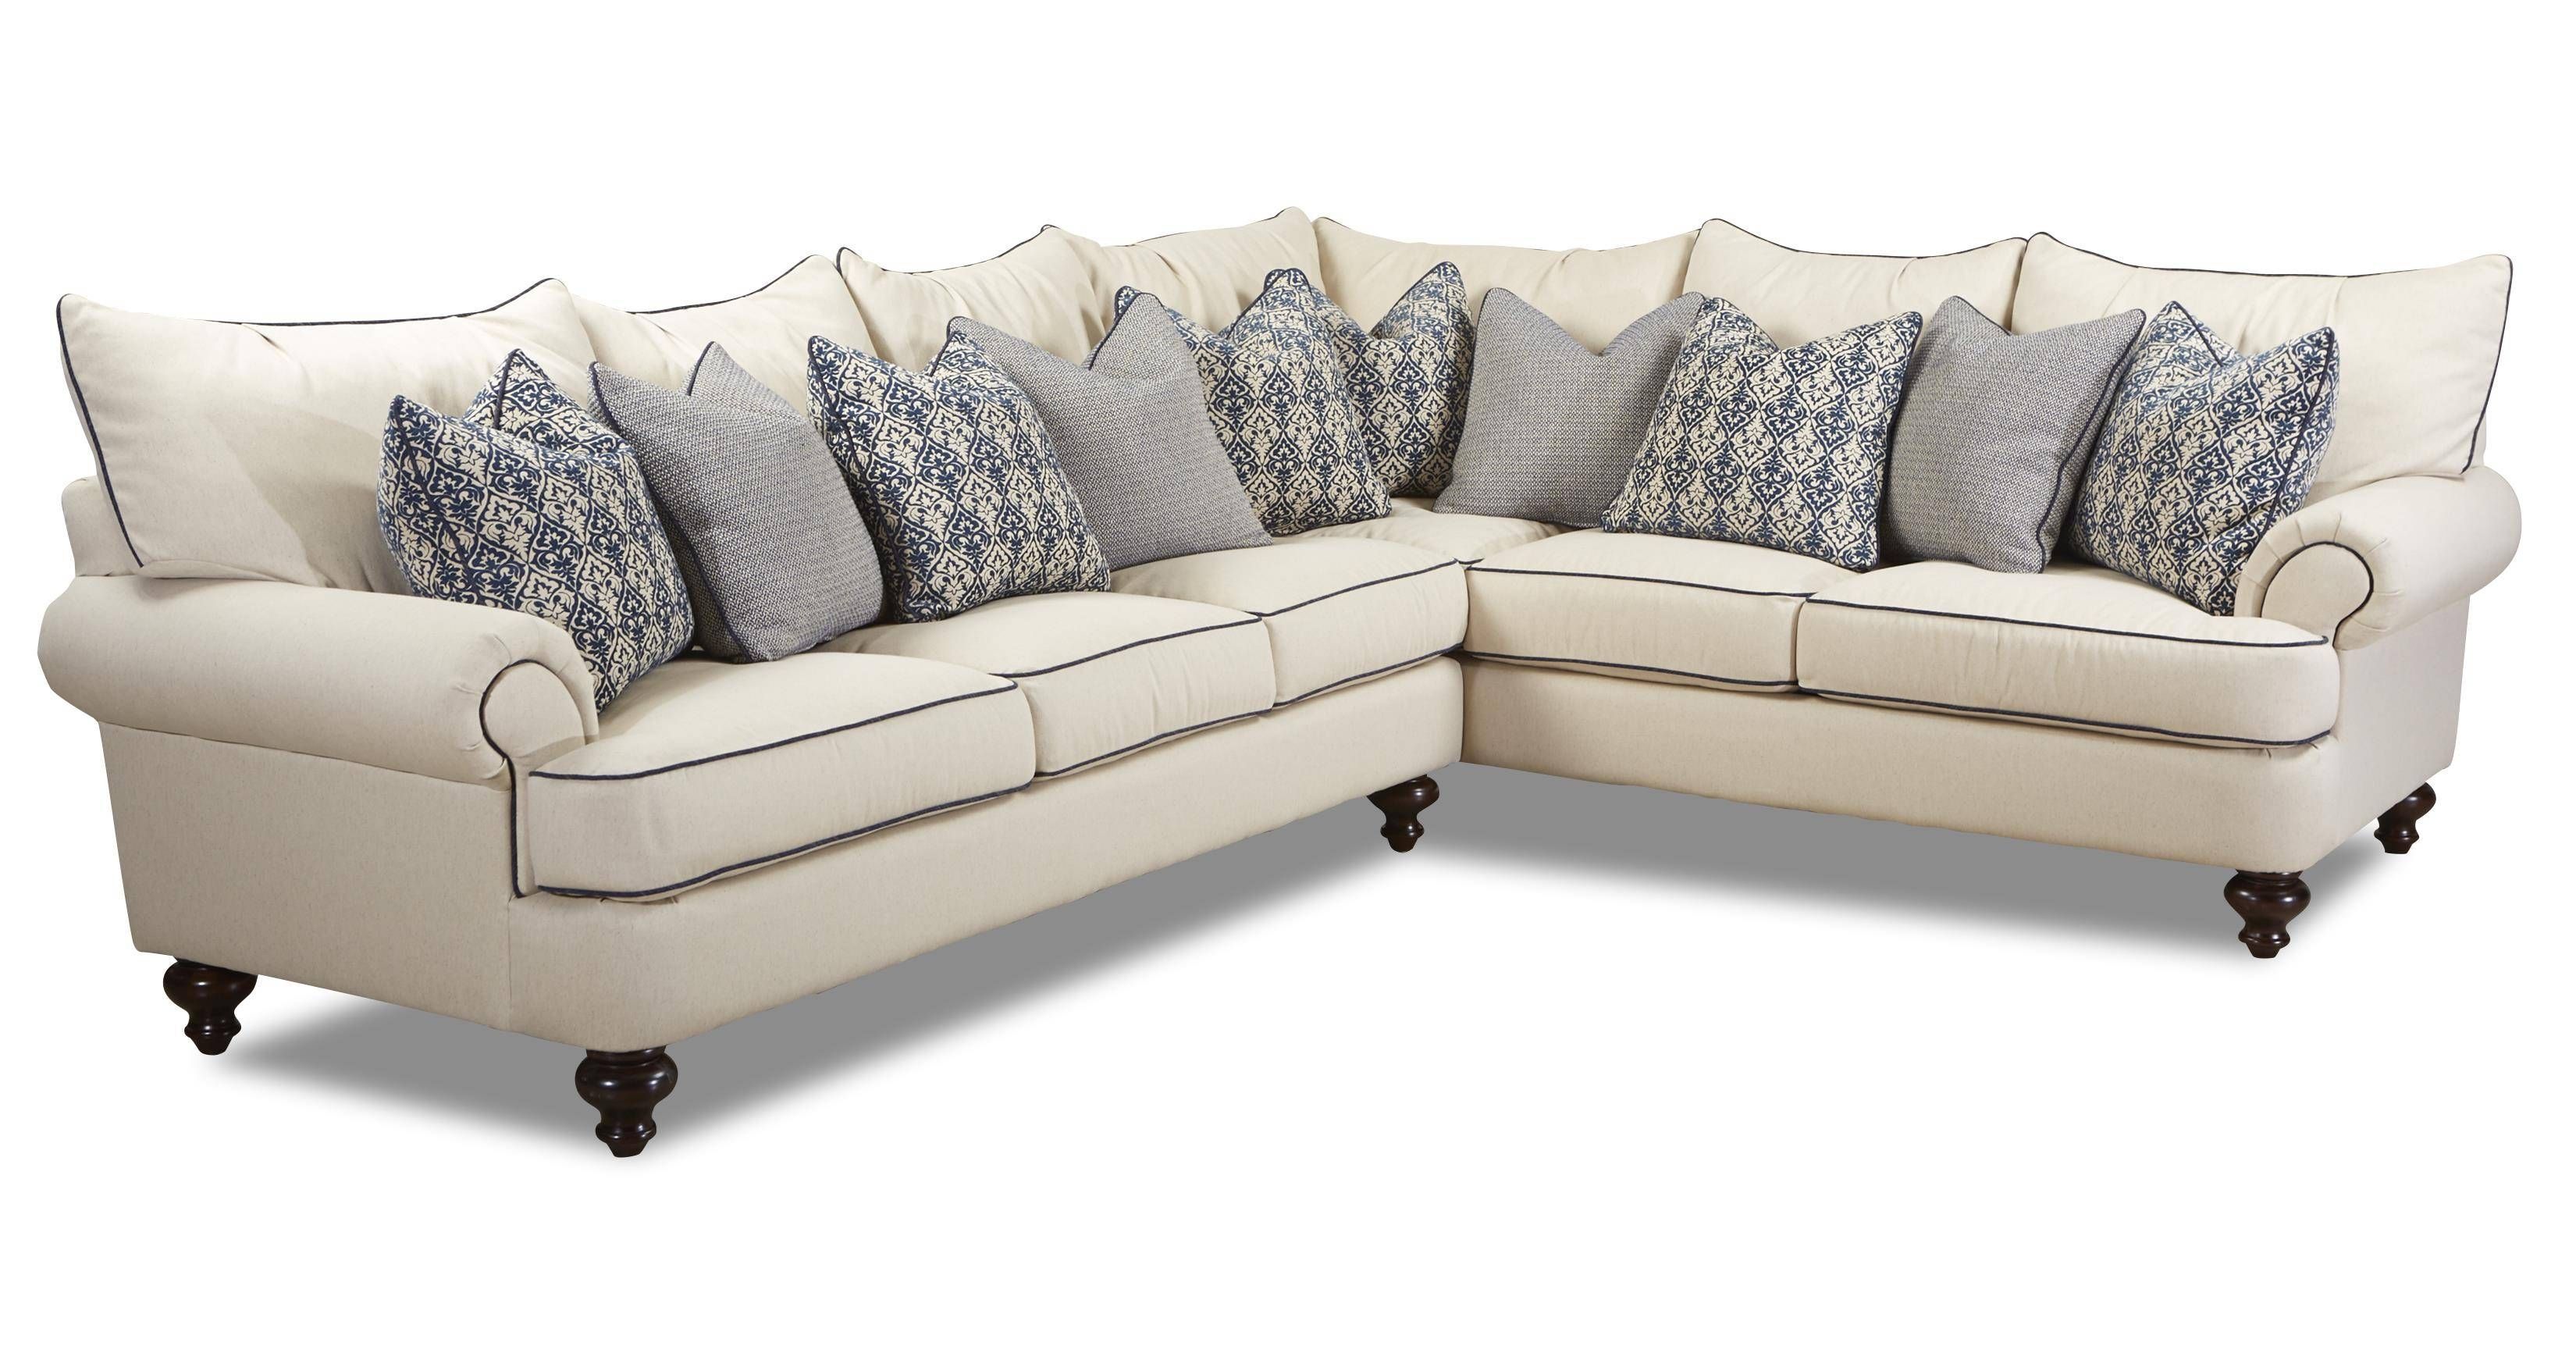 Shabby Chic Sectional Sofaklaussner | Wolf And Gardiner Wolf Inside Shabby Chic Sectional Couches (View 4 of 15)